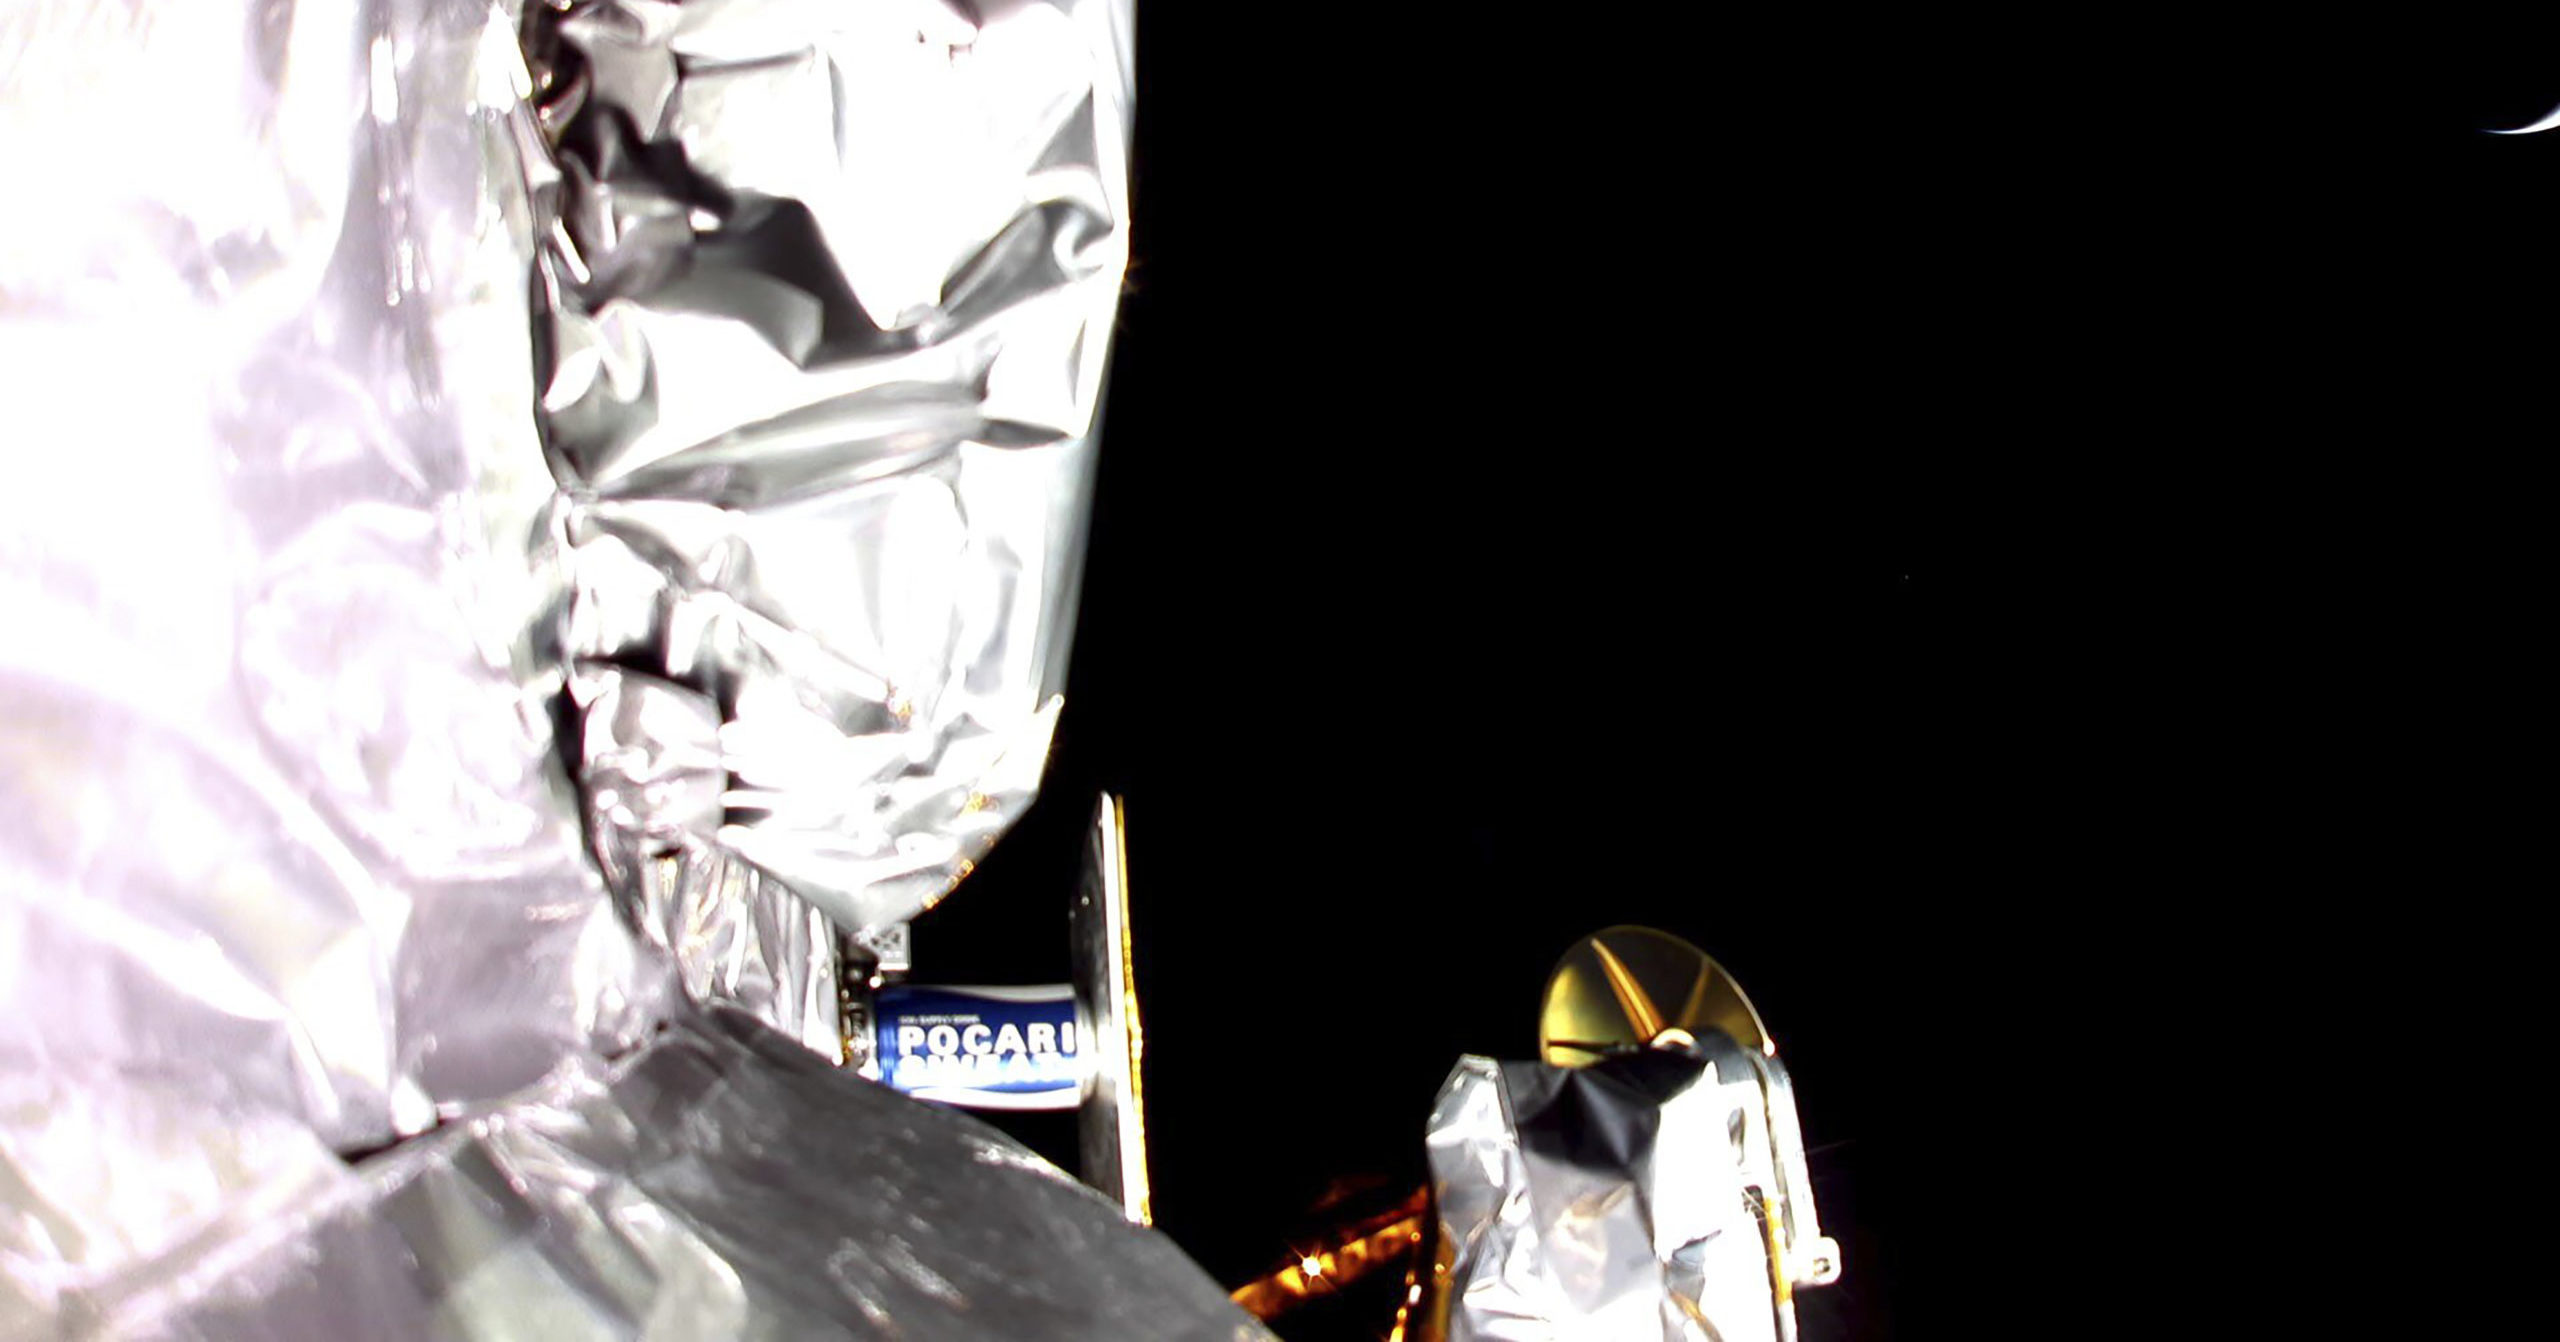 An image from a mounted camera released by Astrobotic Technology shows a section of insulation on the Peregrine lander.